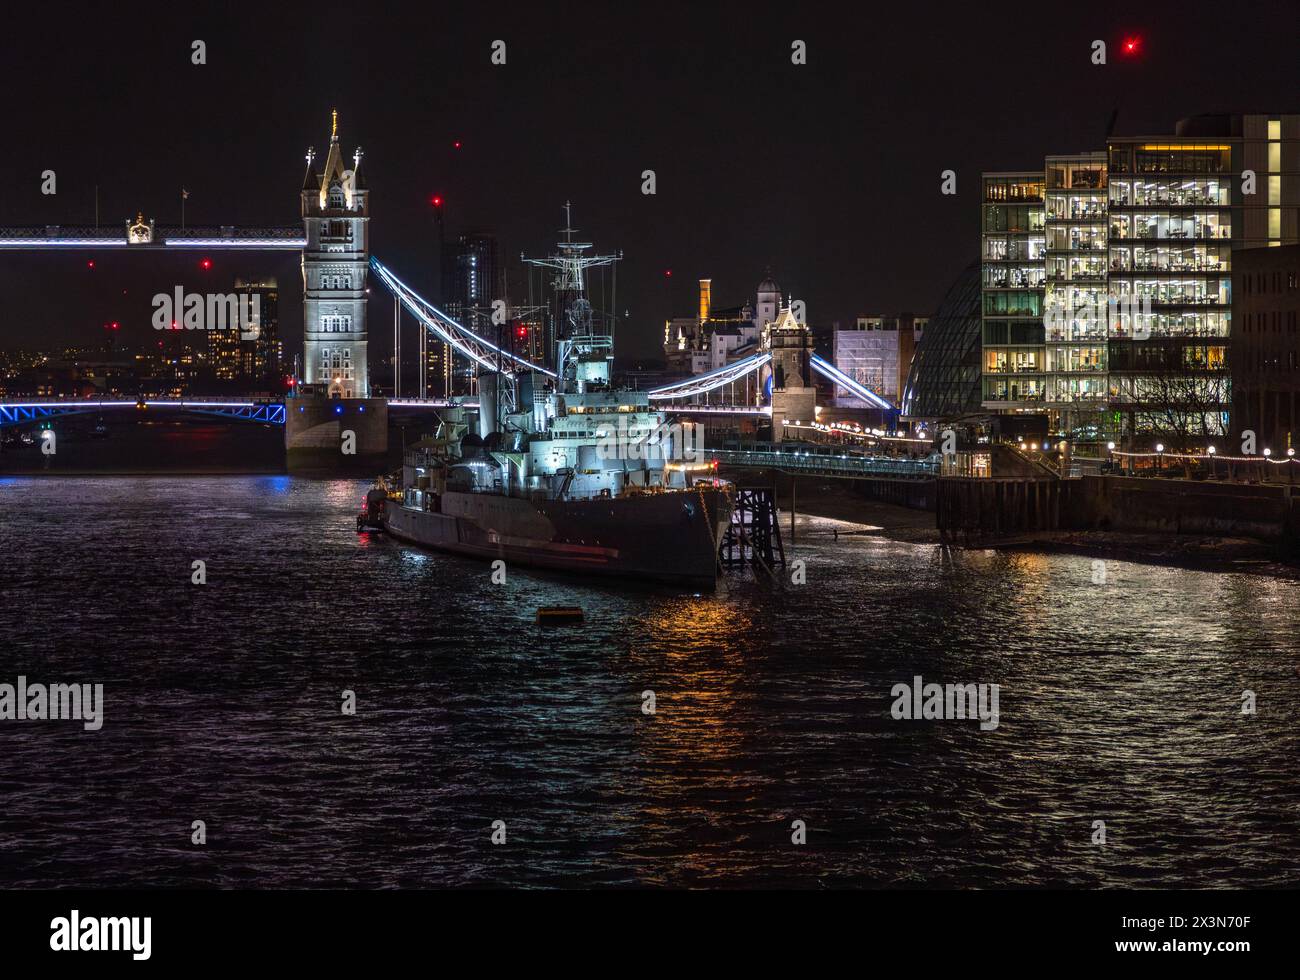 Front view of the war museum ship HMS Belfast docked on the River Thames with reflections of lights from restaurants and buildings in the water in fro Stock Photo